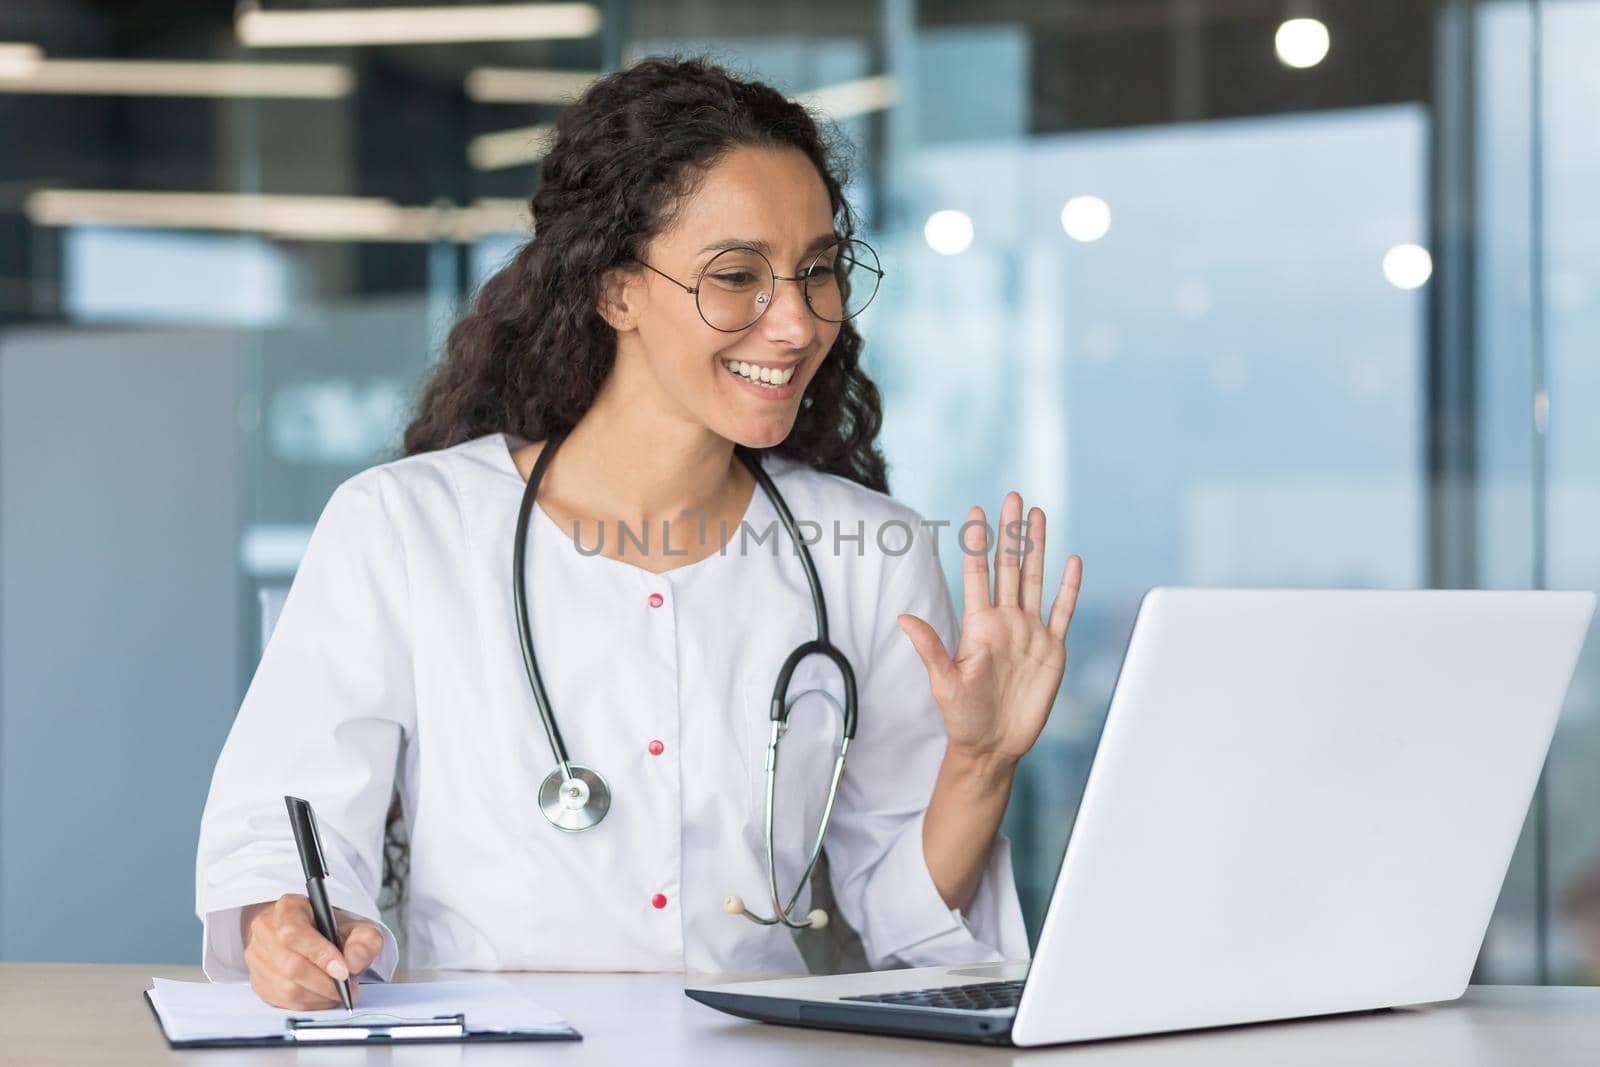 The doctor is online. A young Latin American female doctor participates in an online medical conference, meeting. He waves his hand at the laptop camera, says hello, smiles, takes notes.